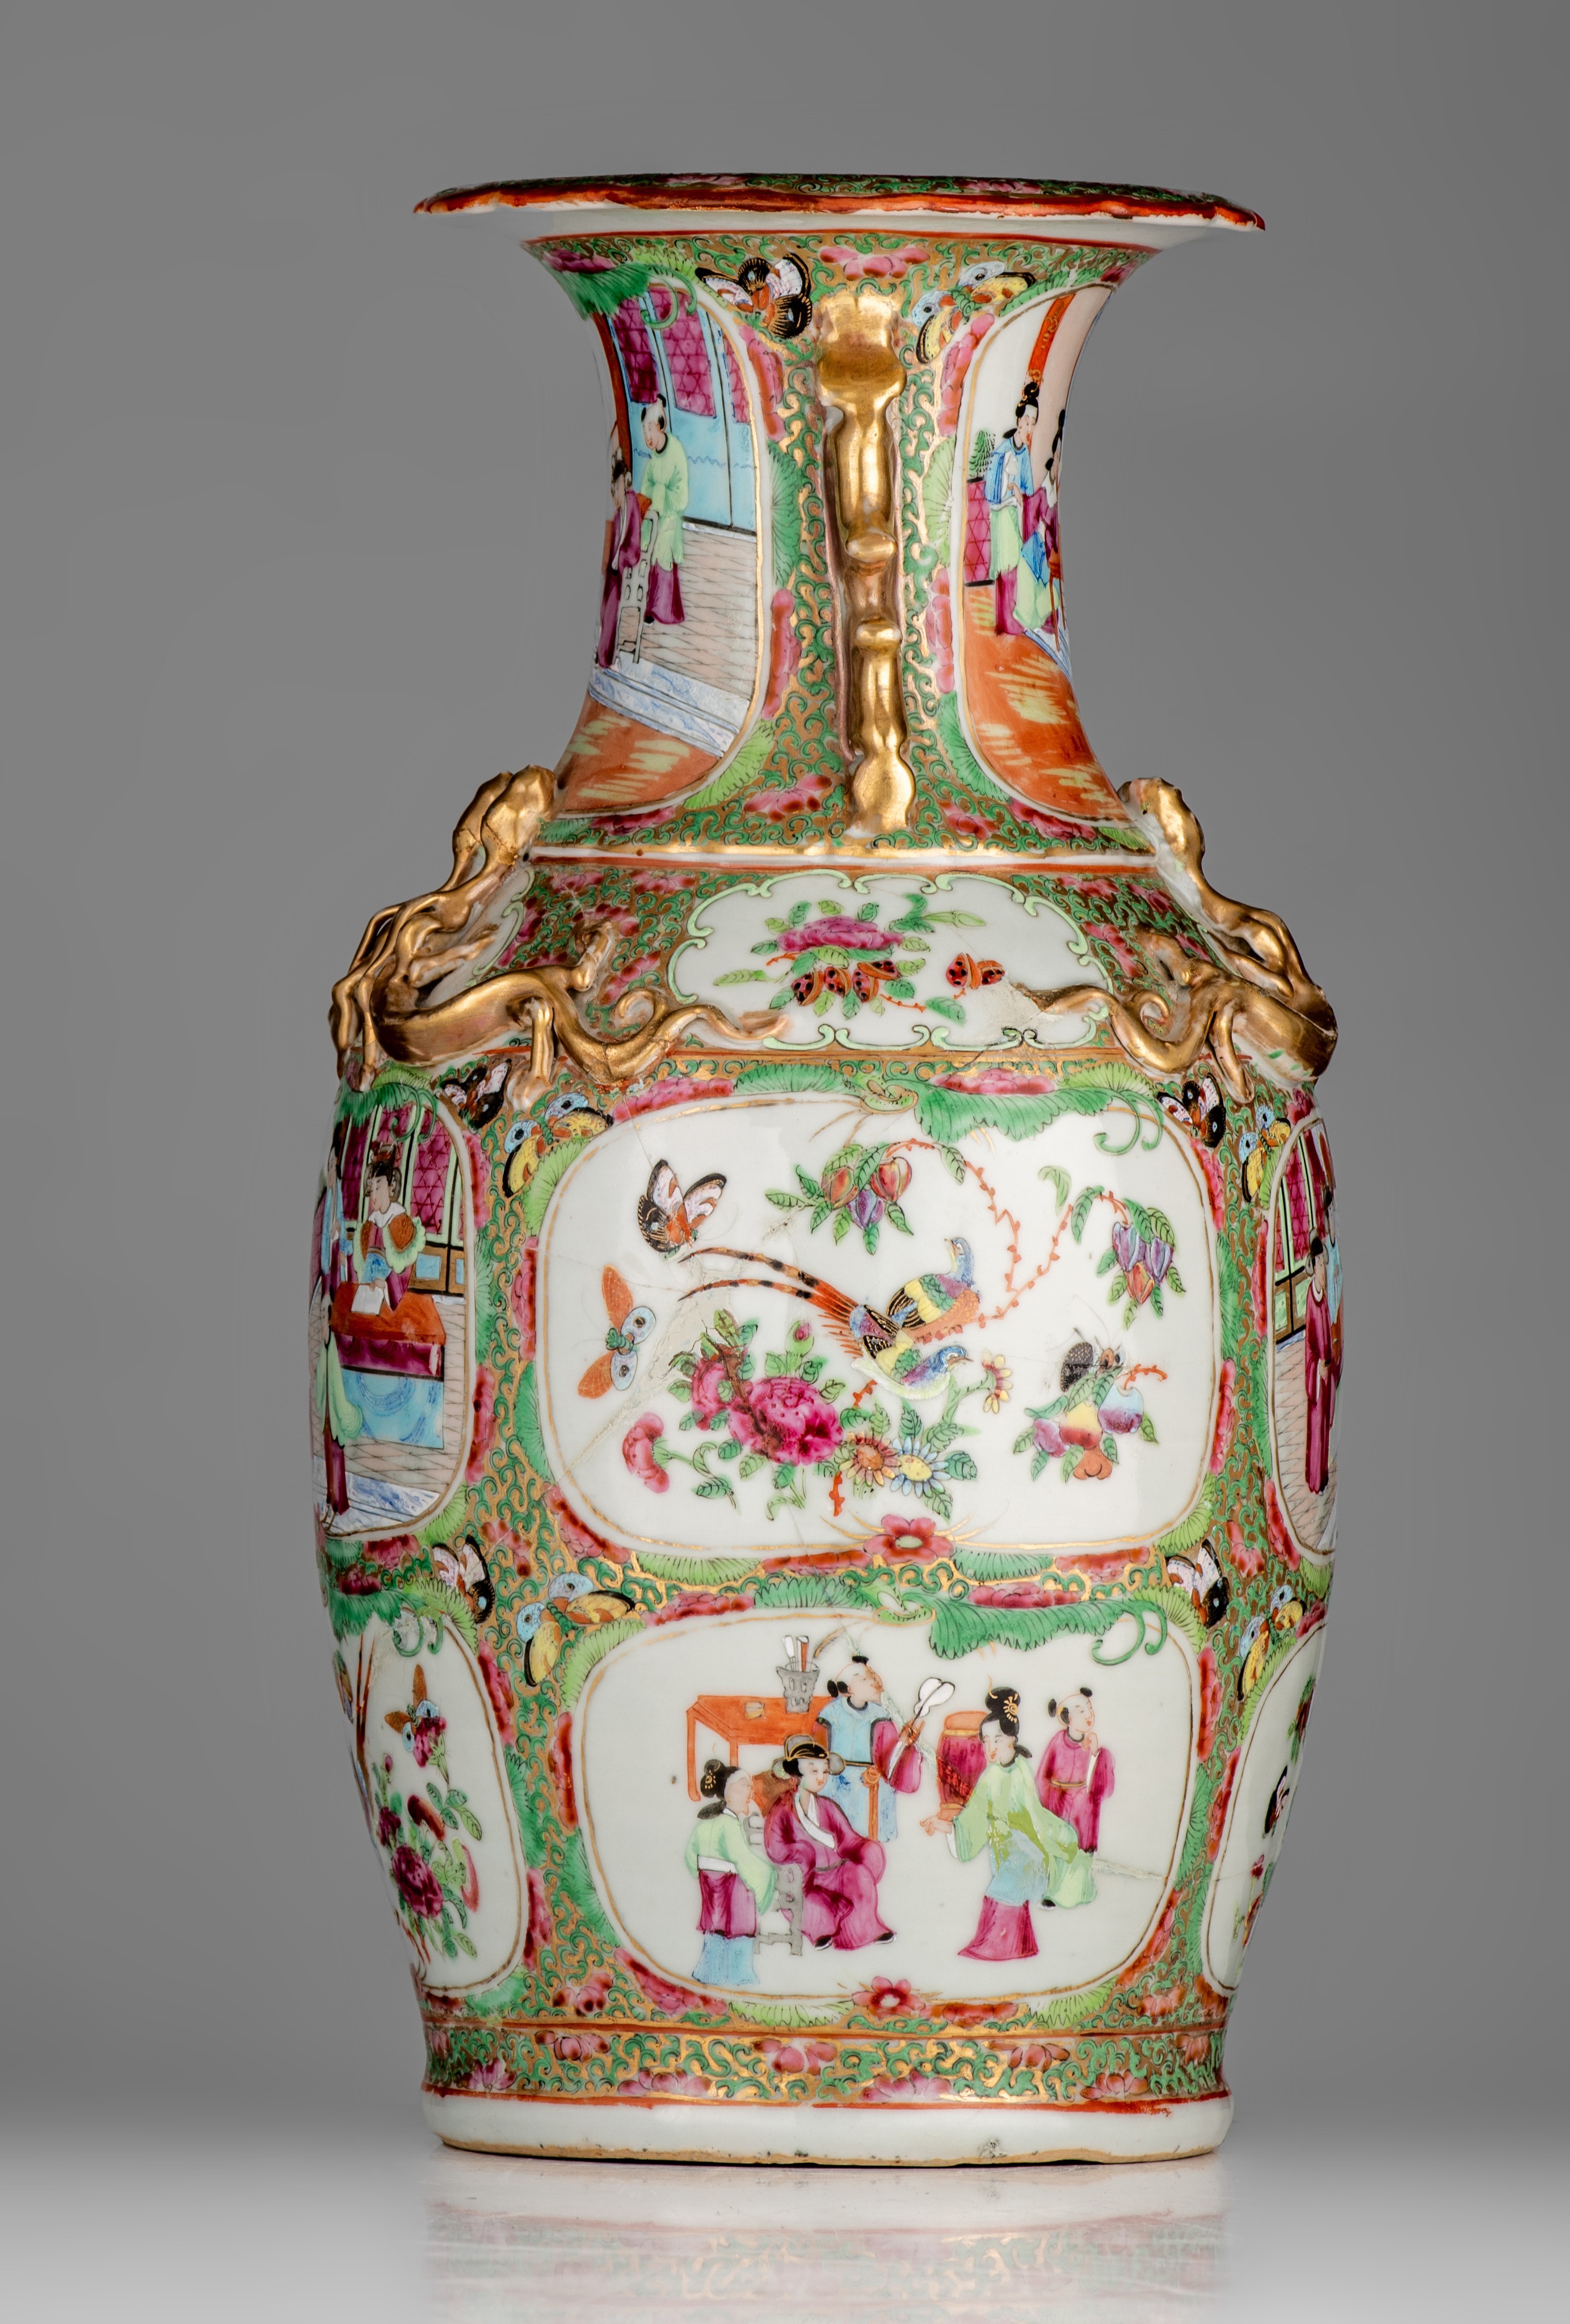 Four Chinese famille rose vases, some with a signed text, 19thC and Republic period, H 42,5 - 43,5 c - Image 17 of 20